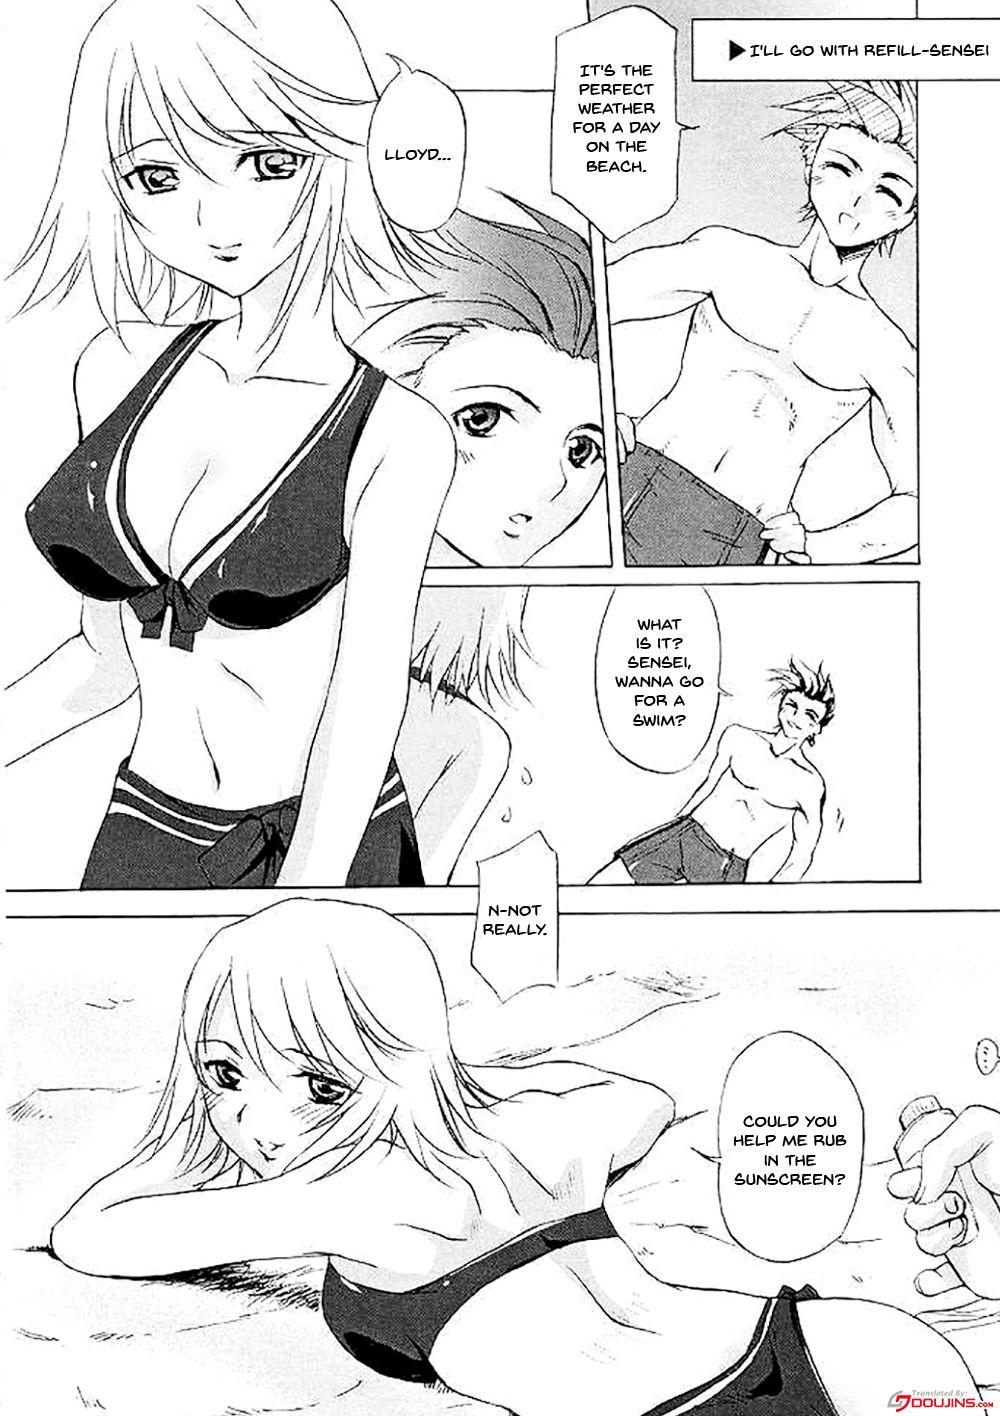 Holes Tales of Seaside - Tales of symphonia Italiano - Page 3